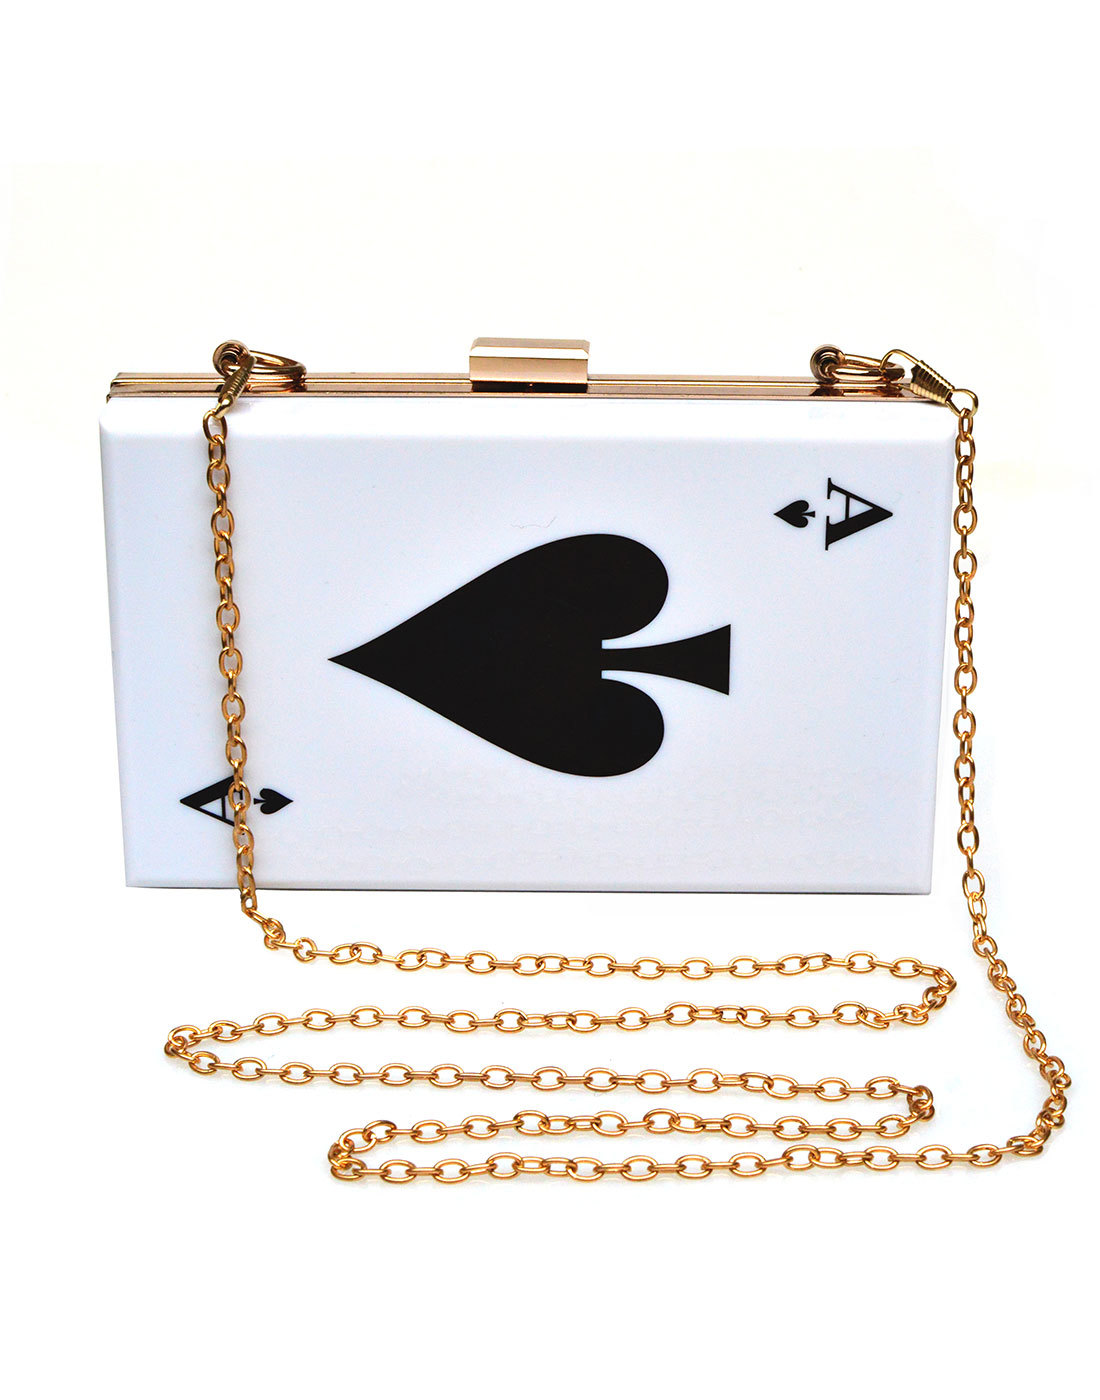 COLLECTIF Ace of Spades 70s Rock N Roll Clutch Bag